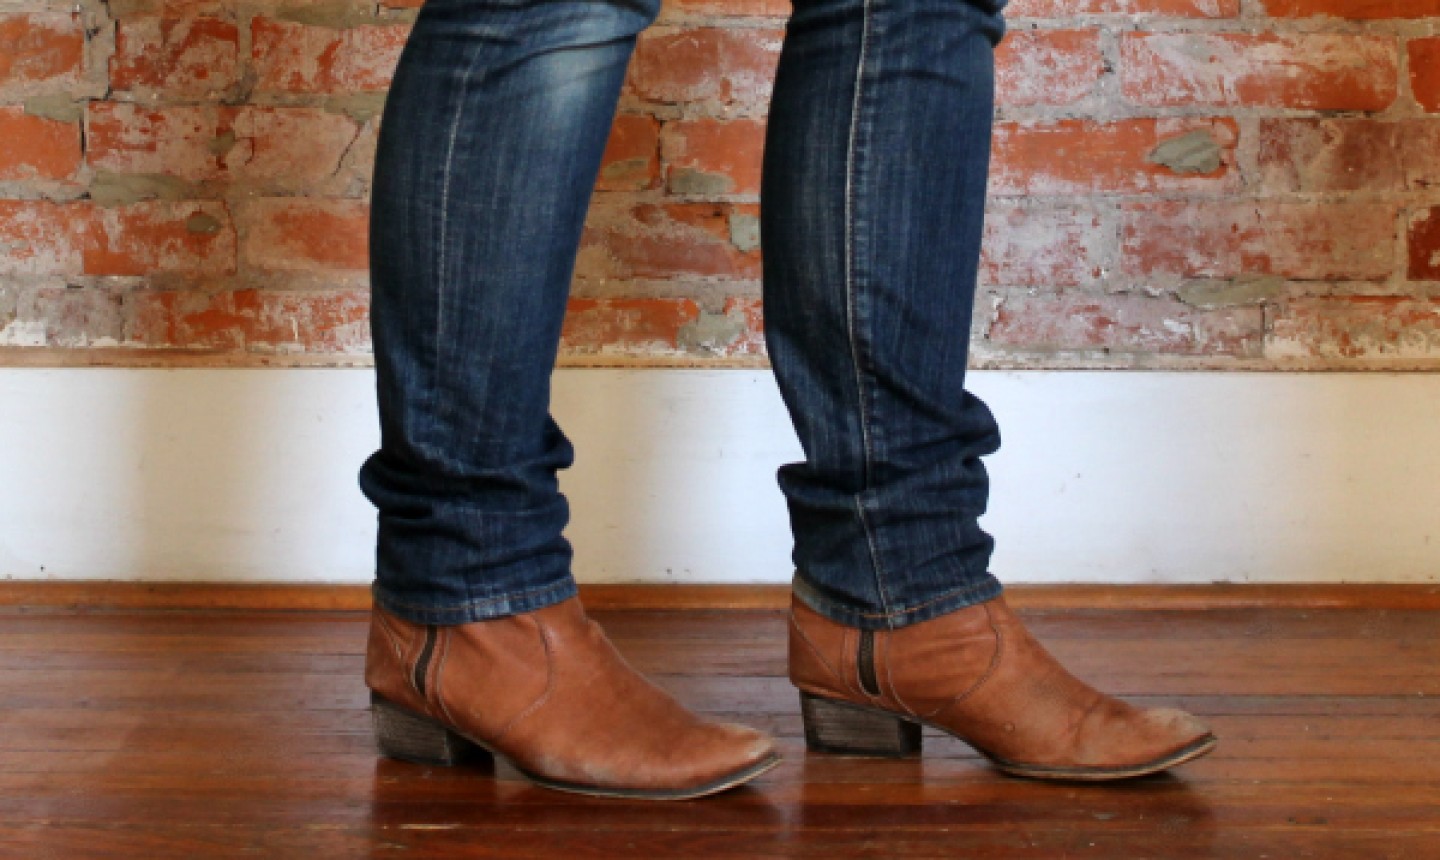 Jeans with boots